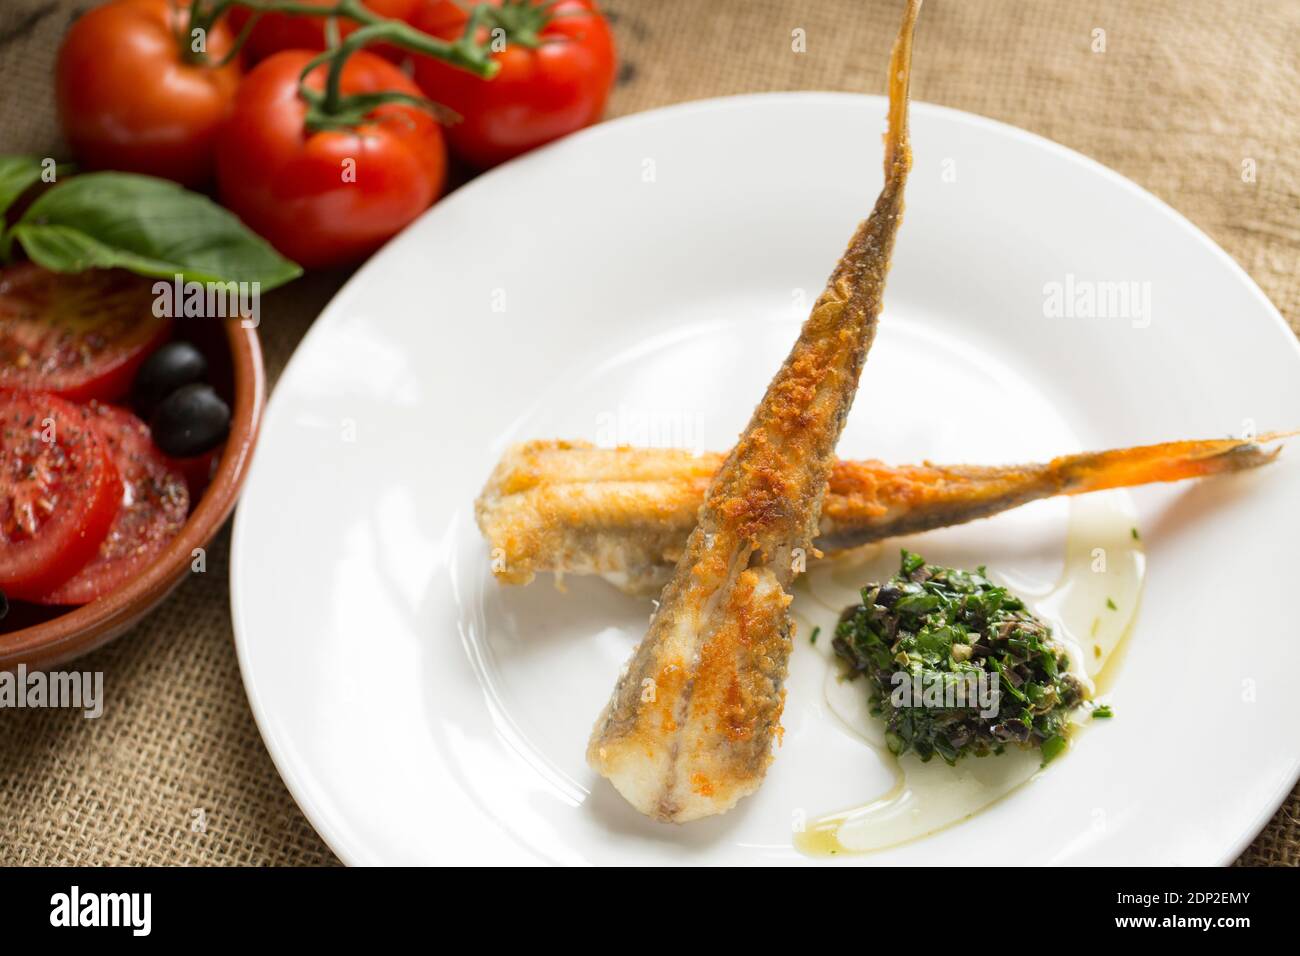 Two skinned tub gurnards, Cheliodonichthys lucerna, that have been rolled in flour and fried. They have been served with a herb, caper and black olive Stock Photo